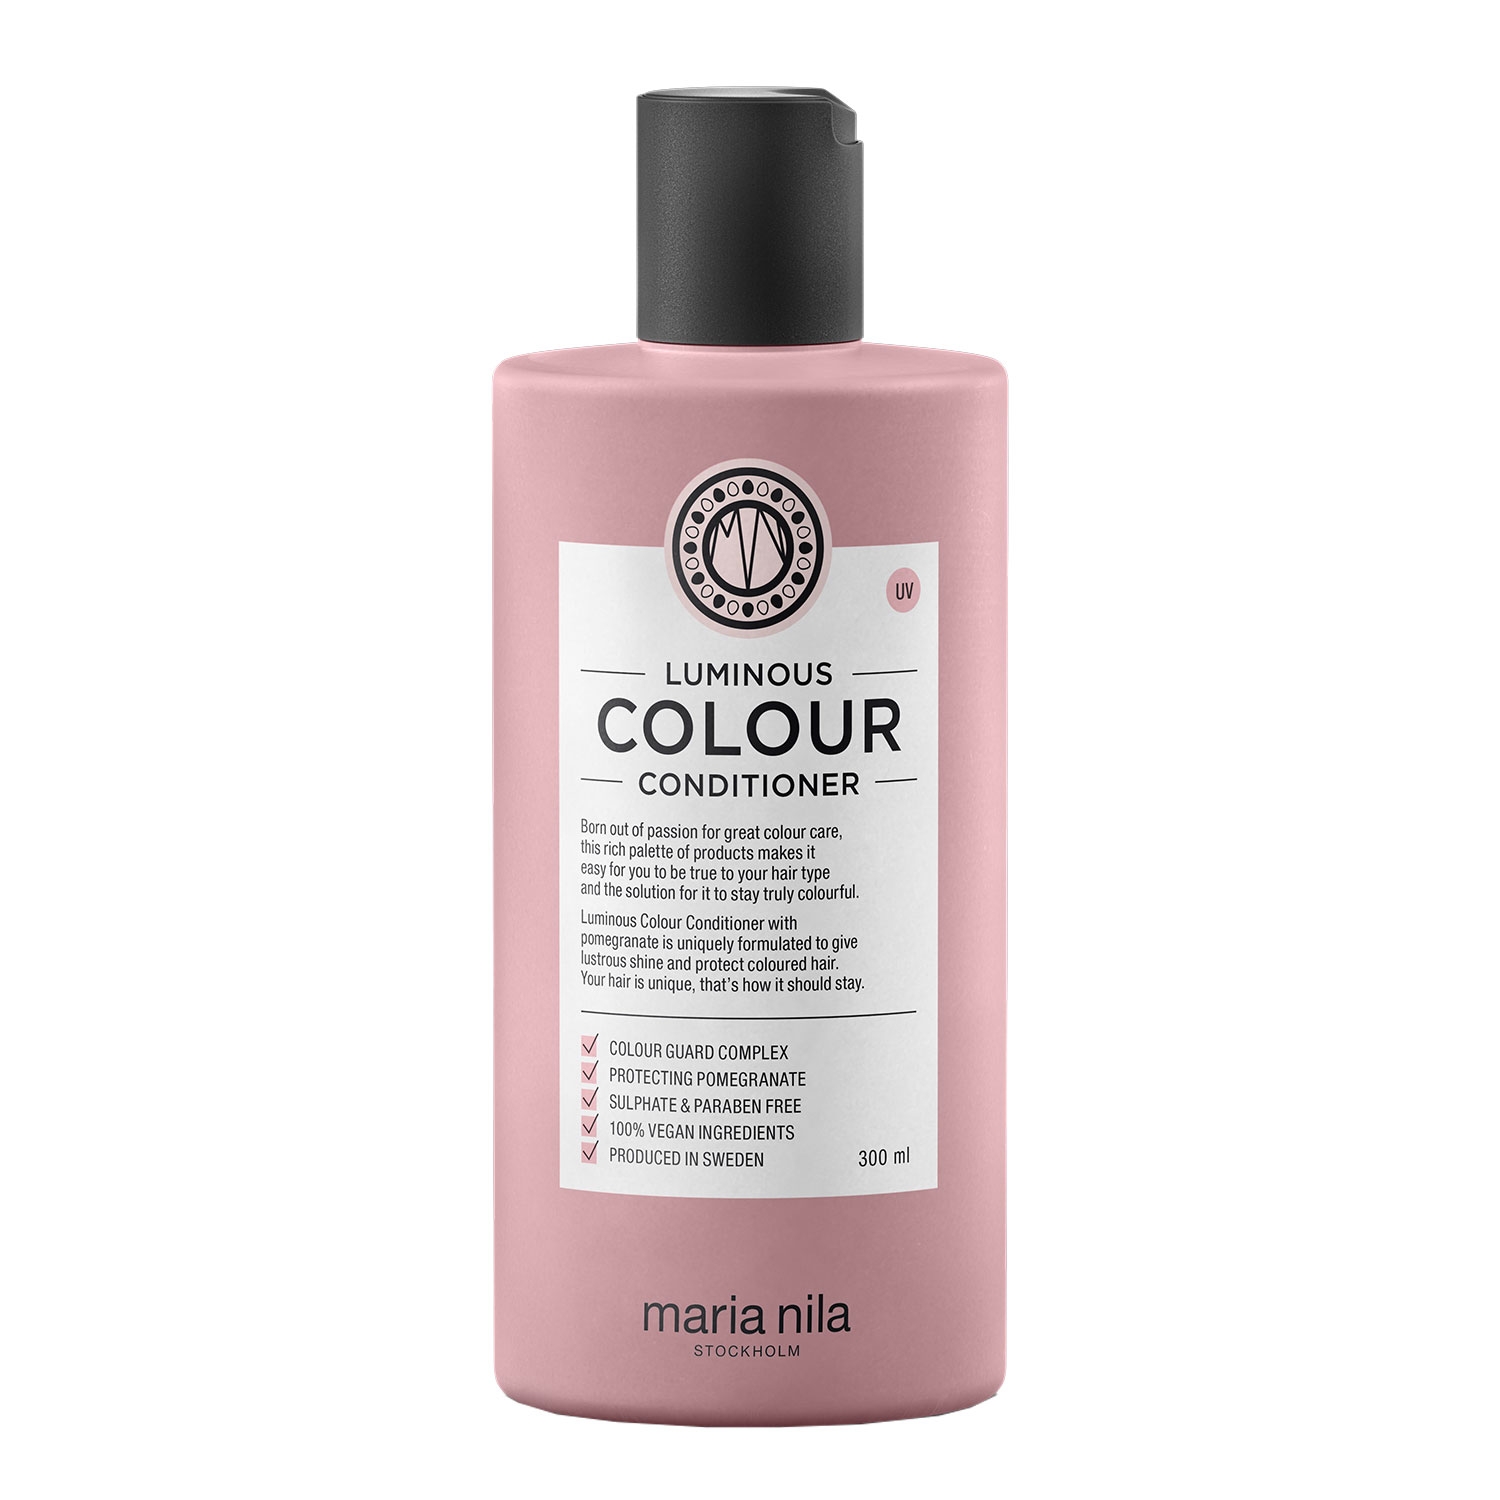 Product image from Care & Style - Luminous Colour Conditioner